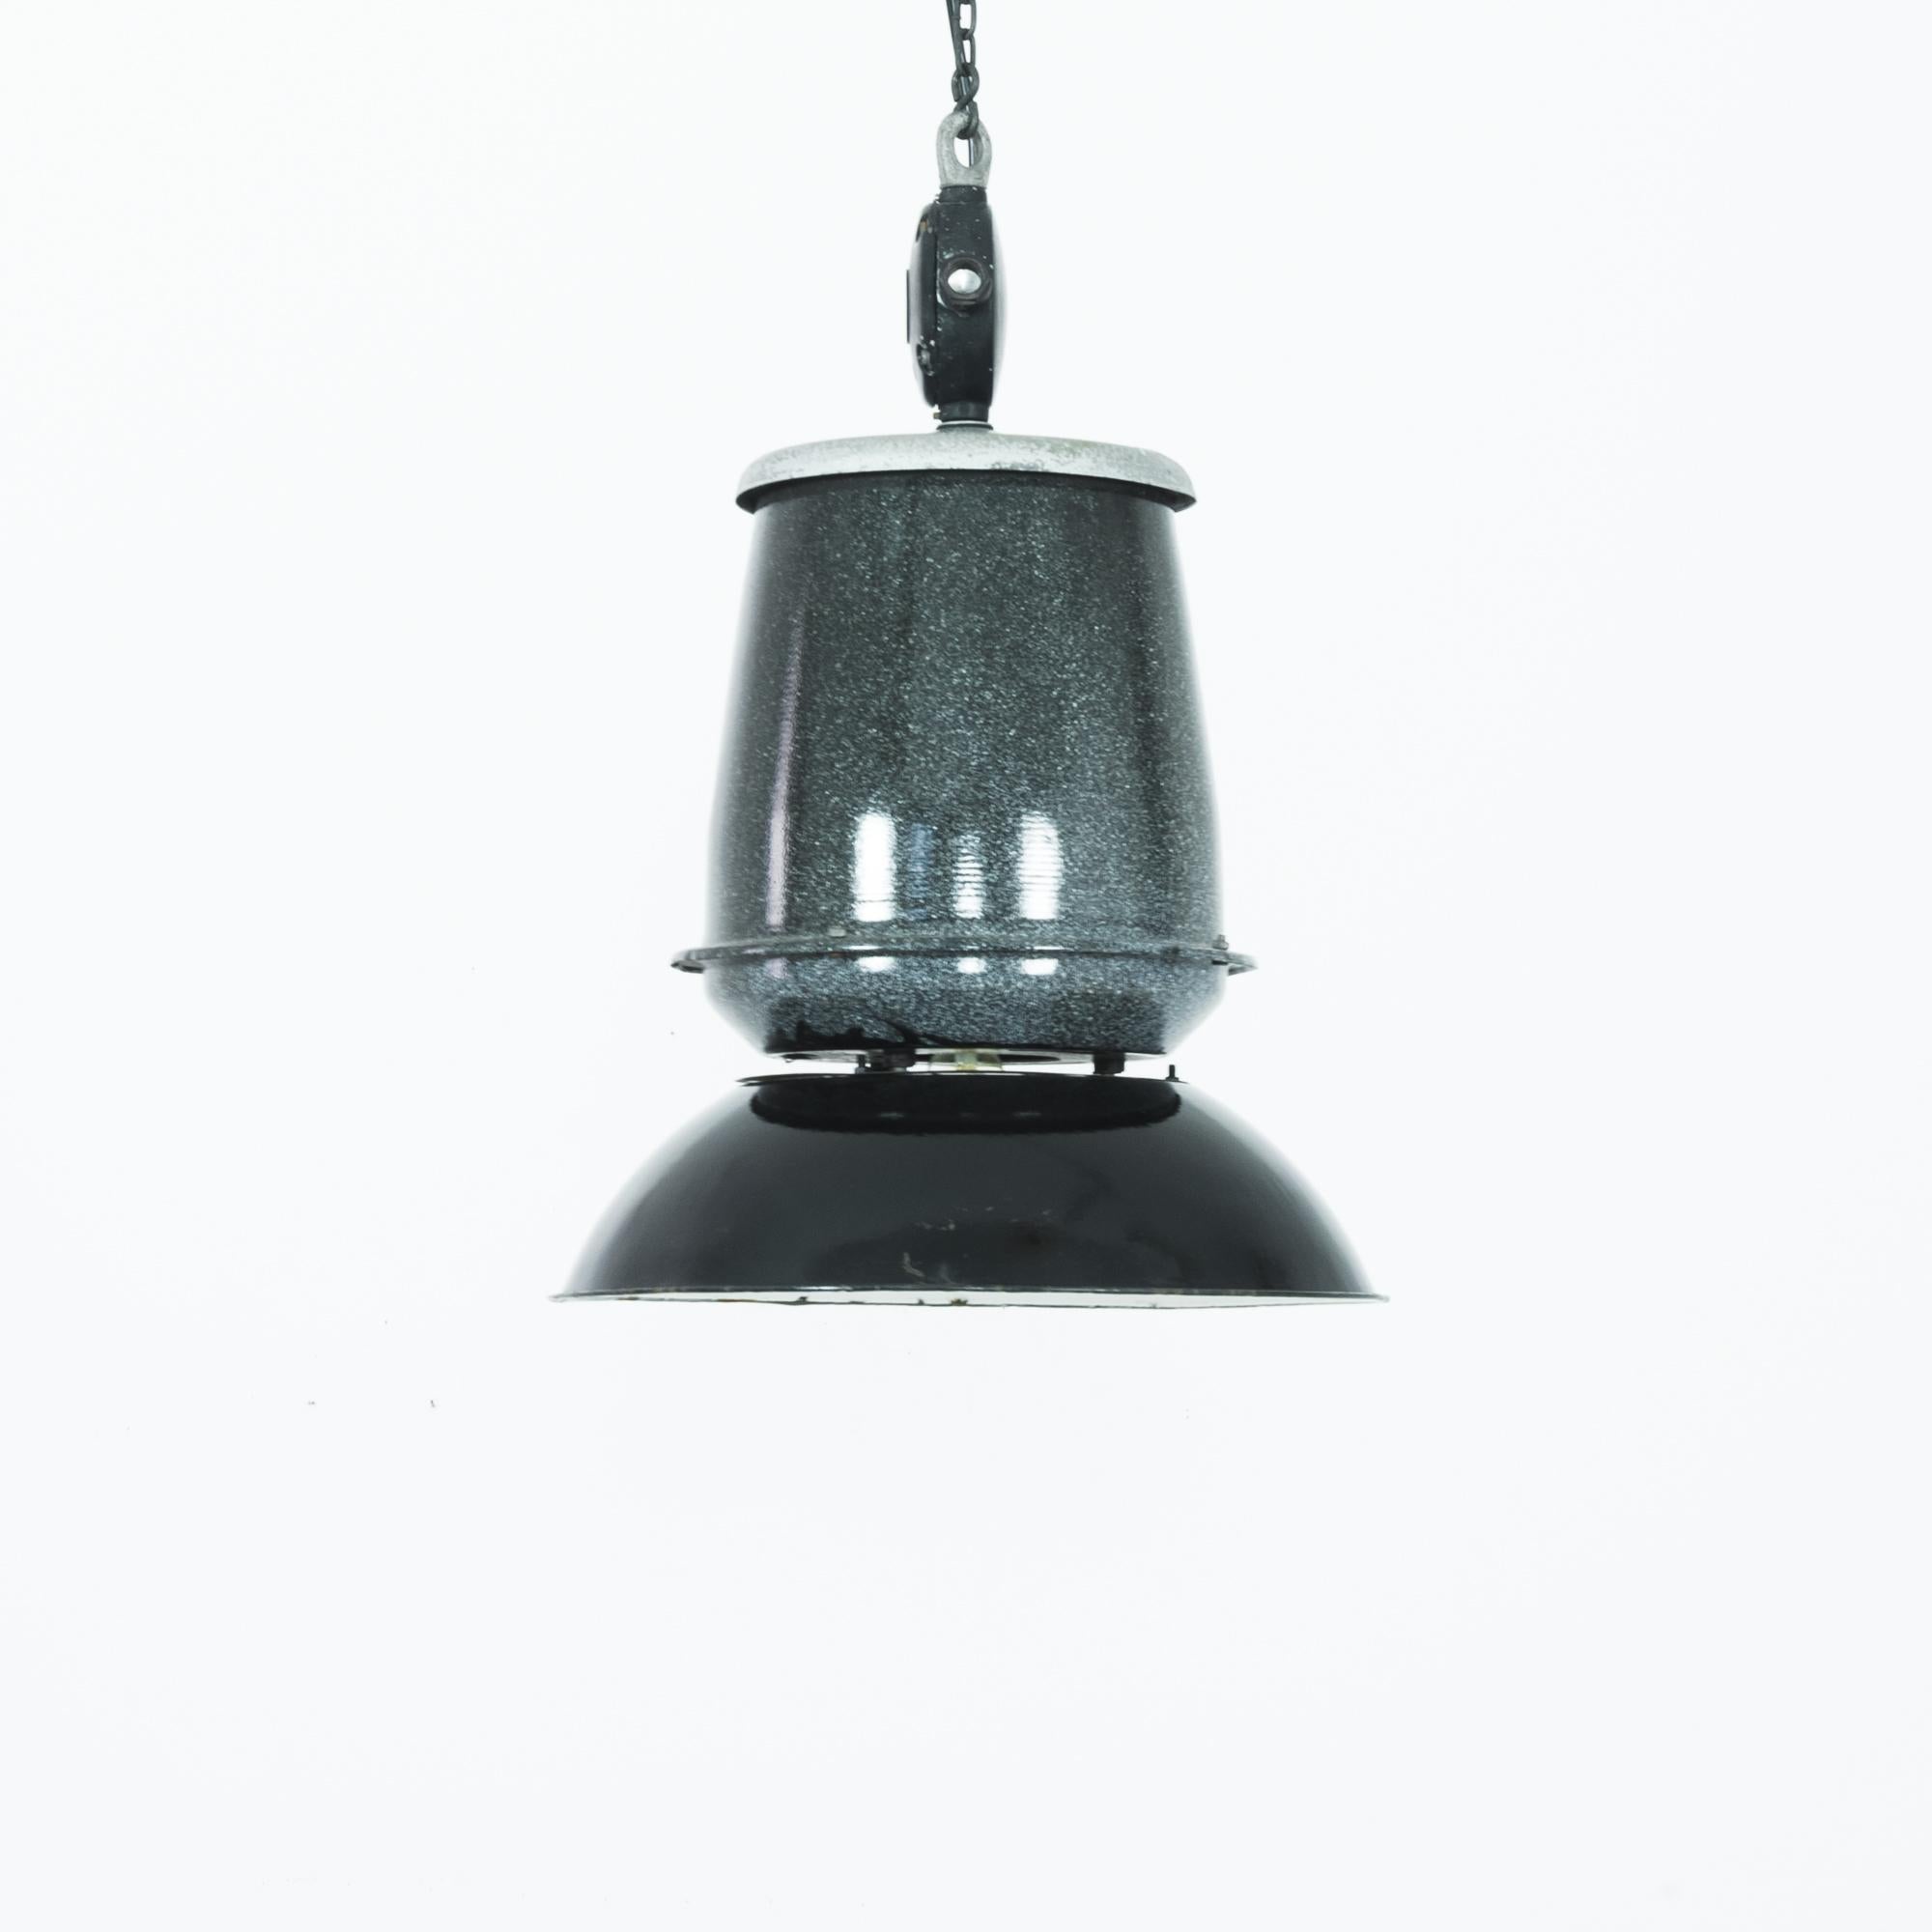 A pendant lamp from 1940s Czechia with an industrial silhouette. A broad metal lamp head hangs from a tapered cylinder; above, a round light fixture bears an original company logo. The speckled enamel of the pendent has a gentle gradient from black